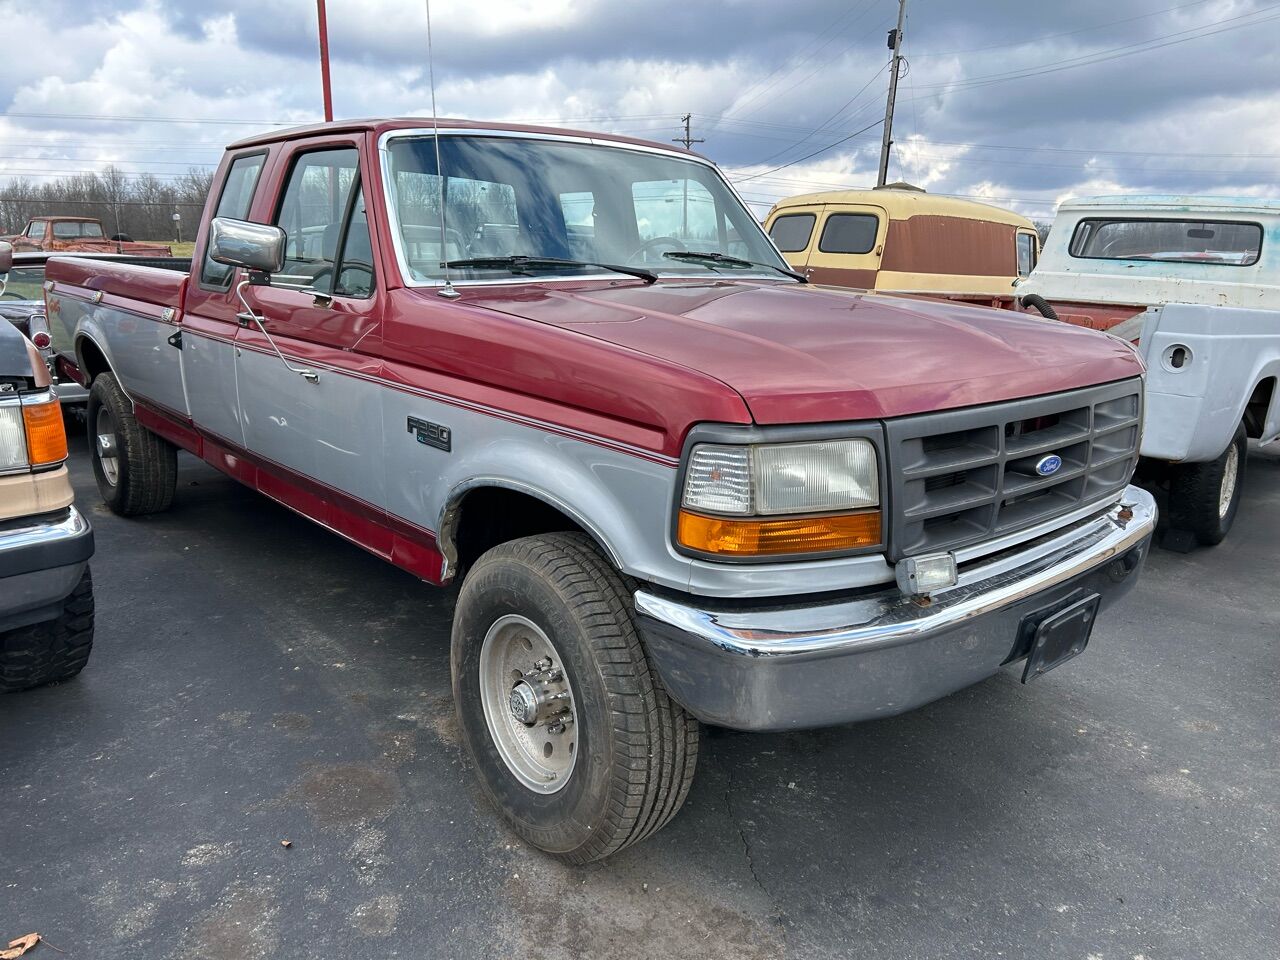 1993 Ford F-250 